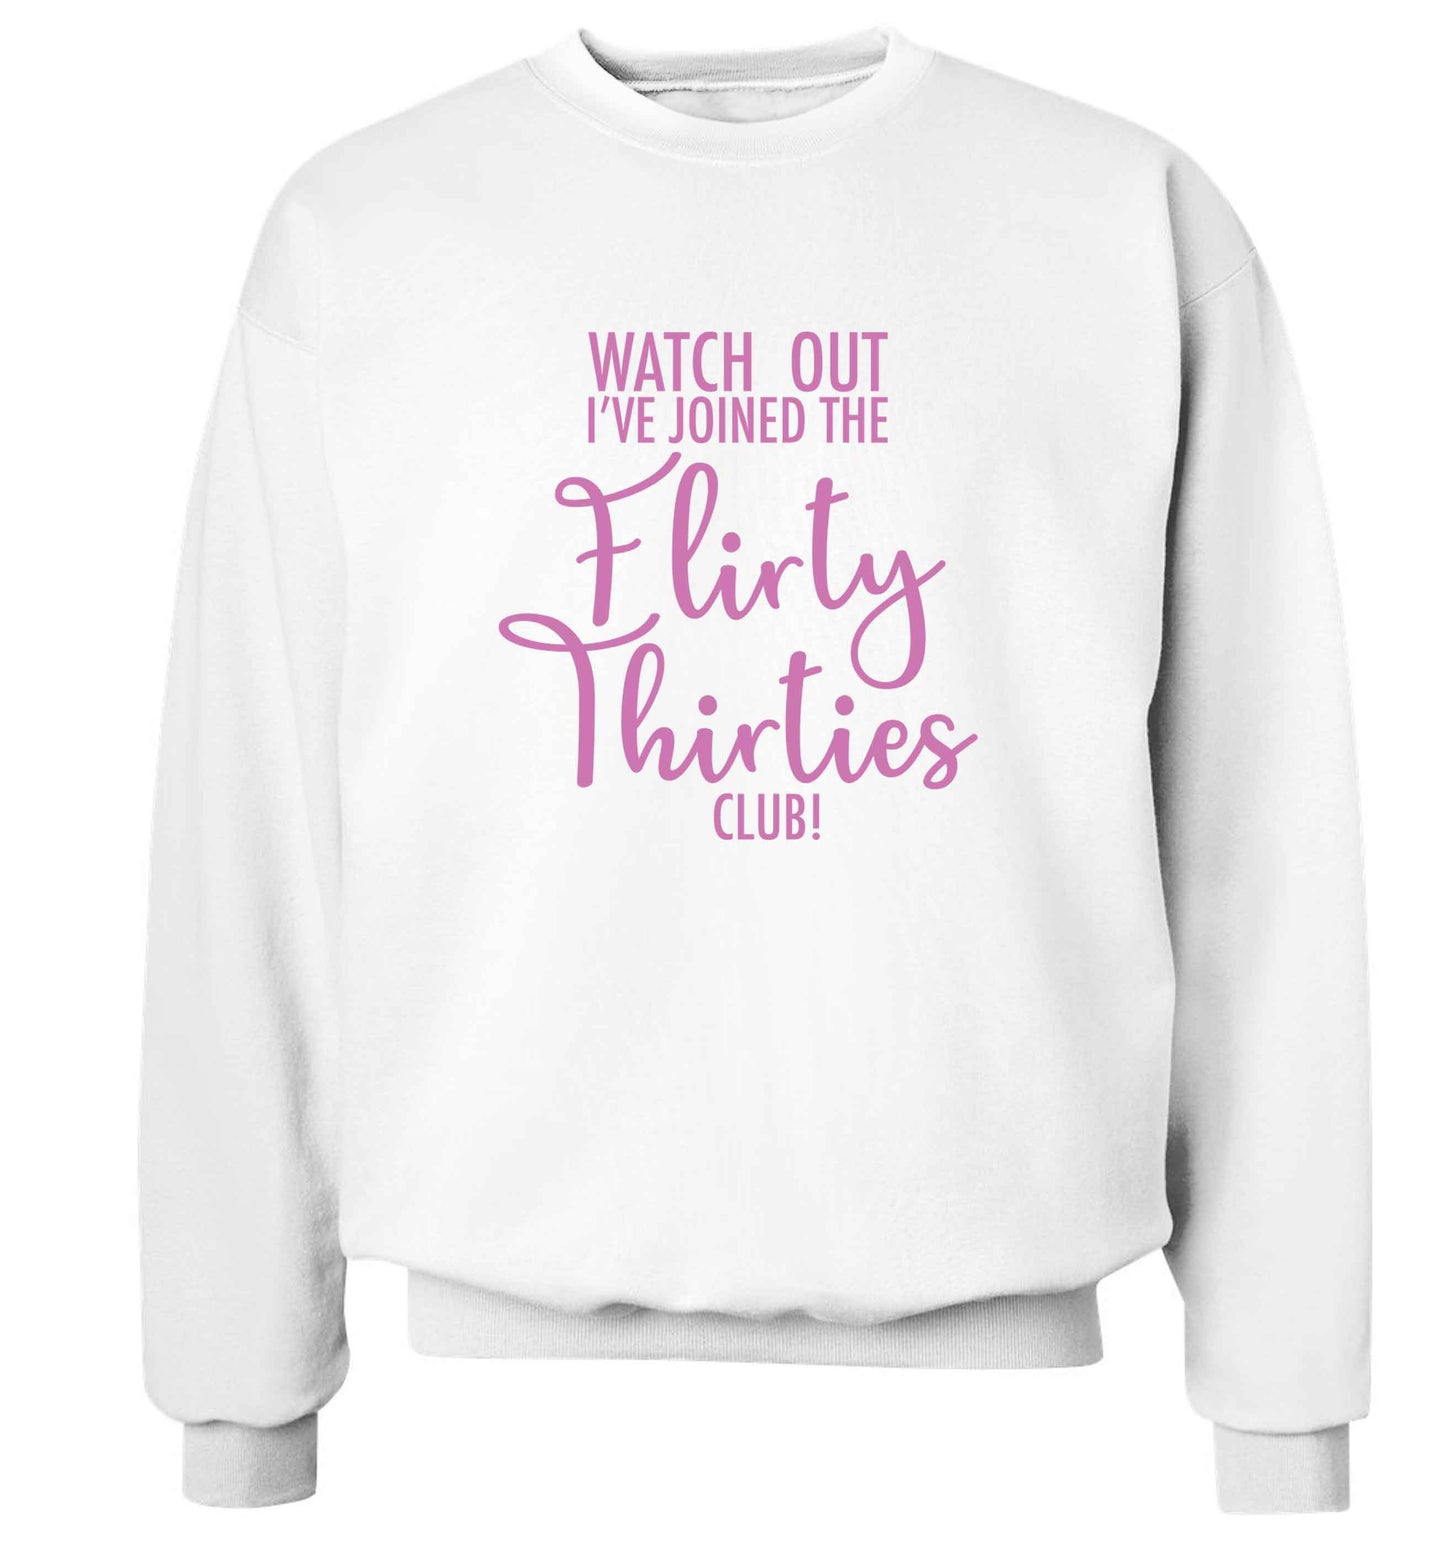 Watch out I've joined the flirty thirties club adult's unisex white sweater 2XL